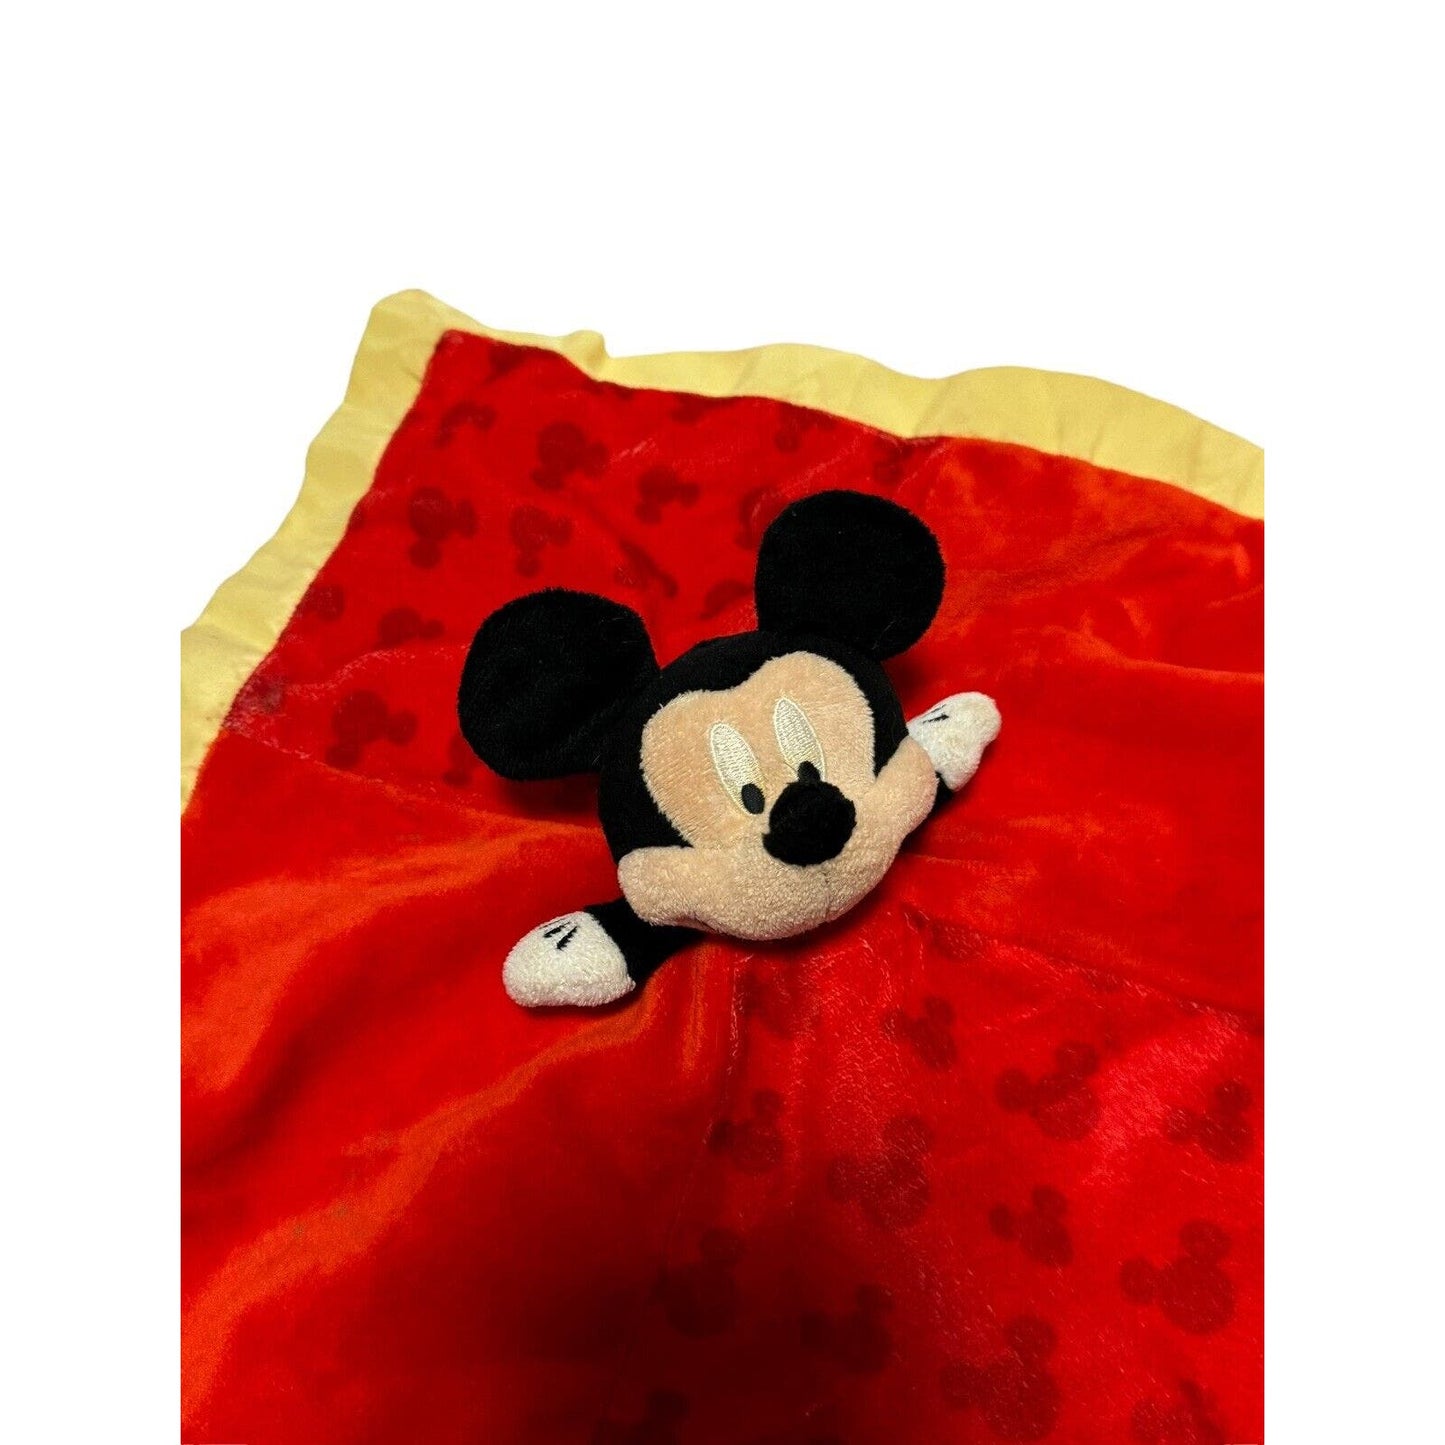 Disney Baby Mickey Mouse Security Blanket Lovey Red Yellow Crinkle Ear Satin